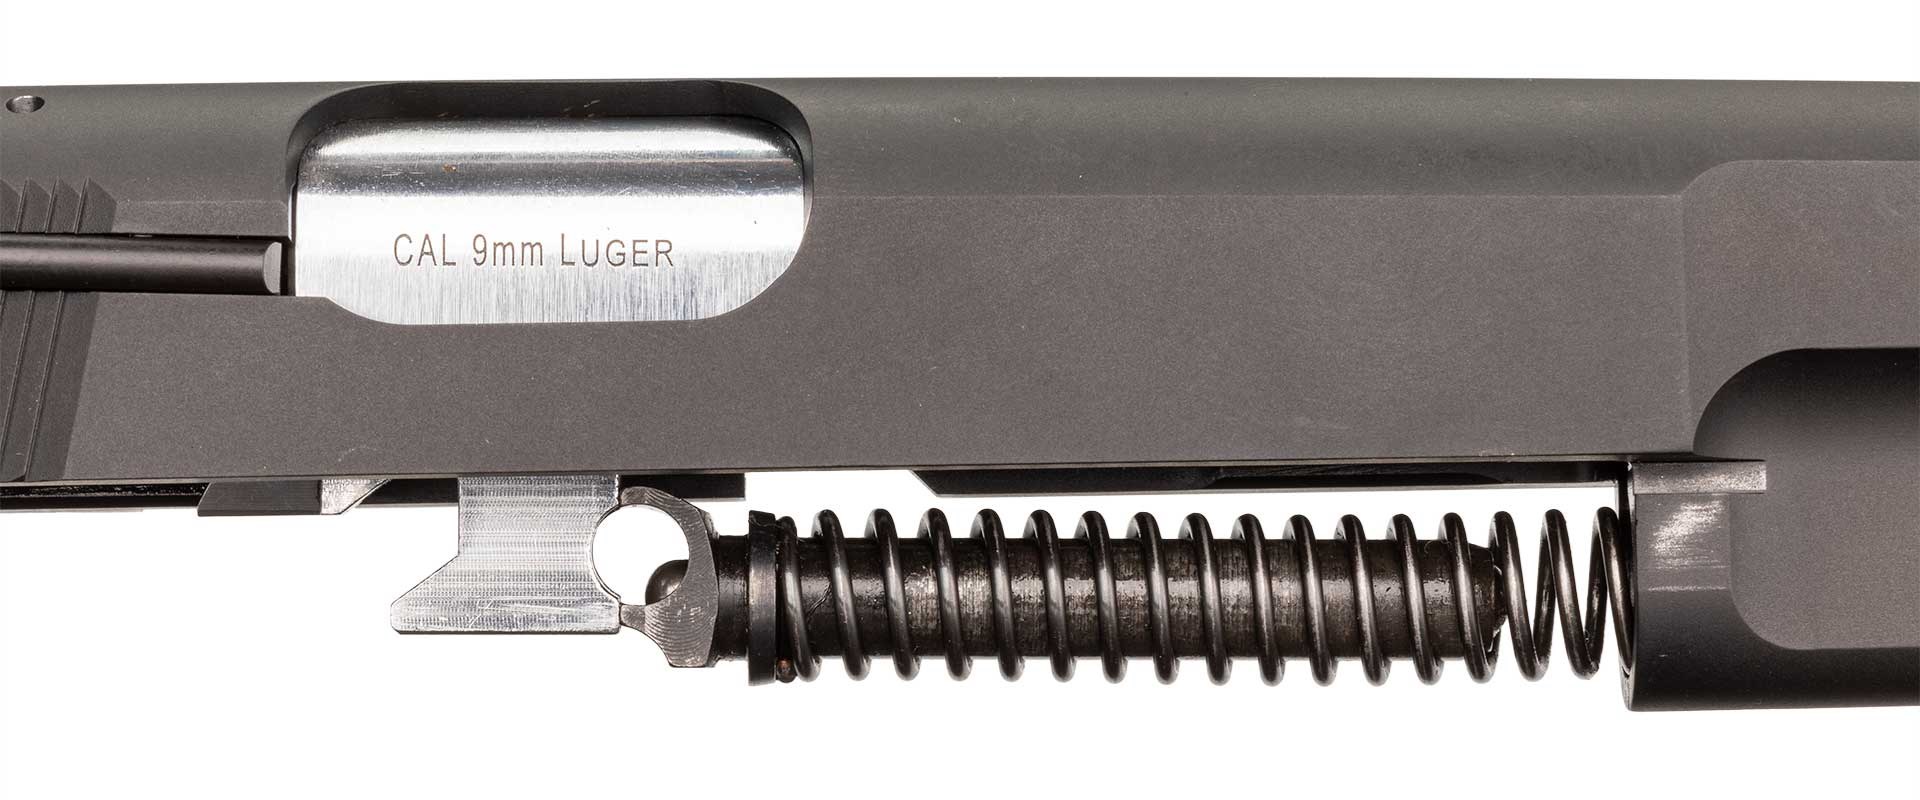 Stripped Springfield SA-35 slide showing the barrel linkage and recoil spring.